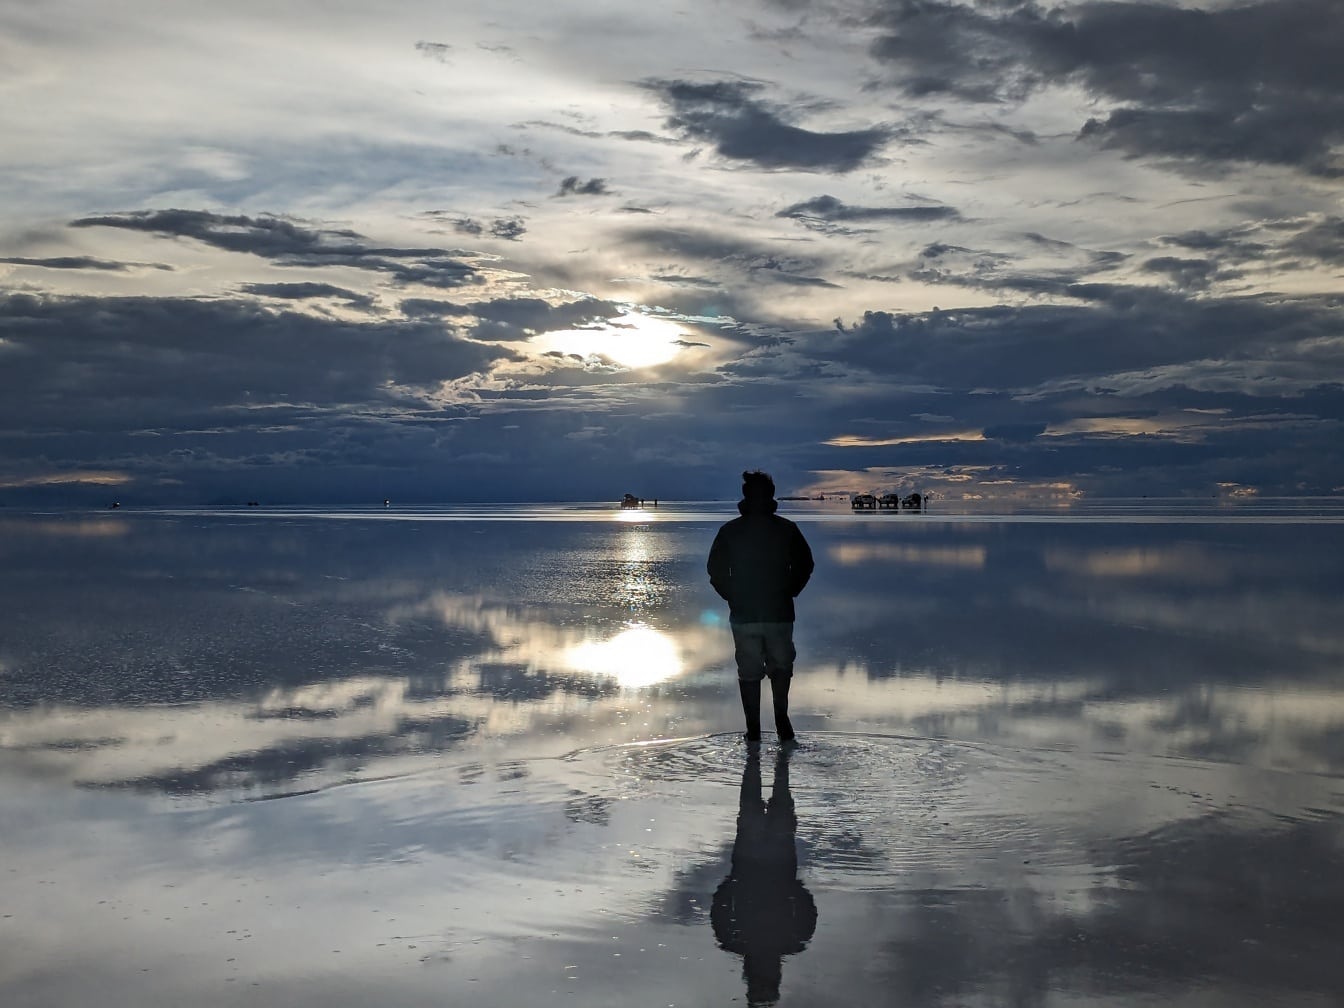 Silhouette of man standing in shallow water at dusk